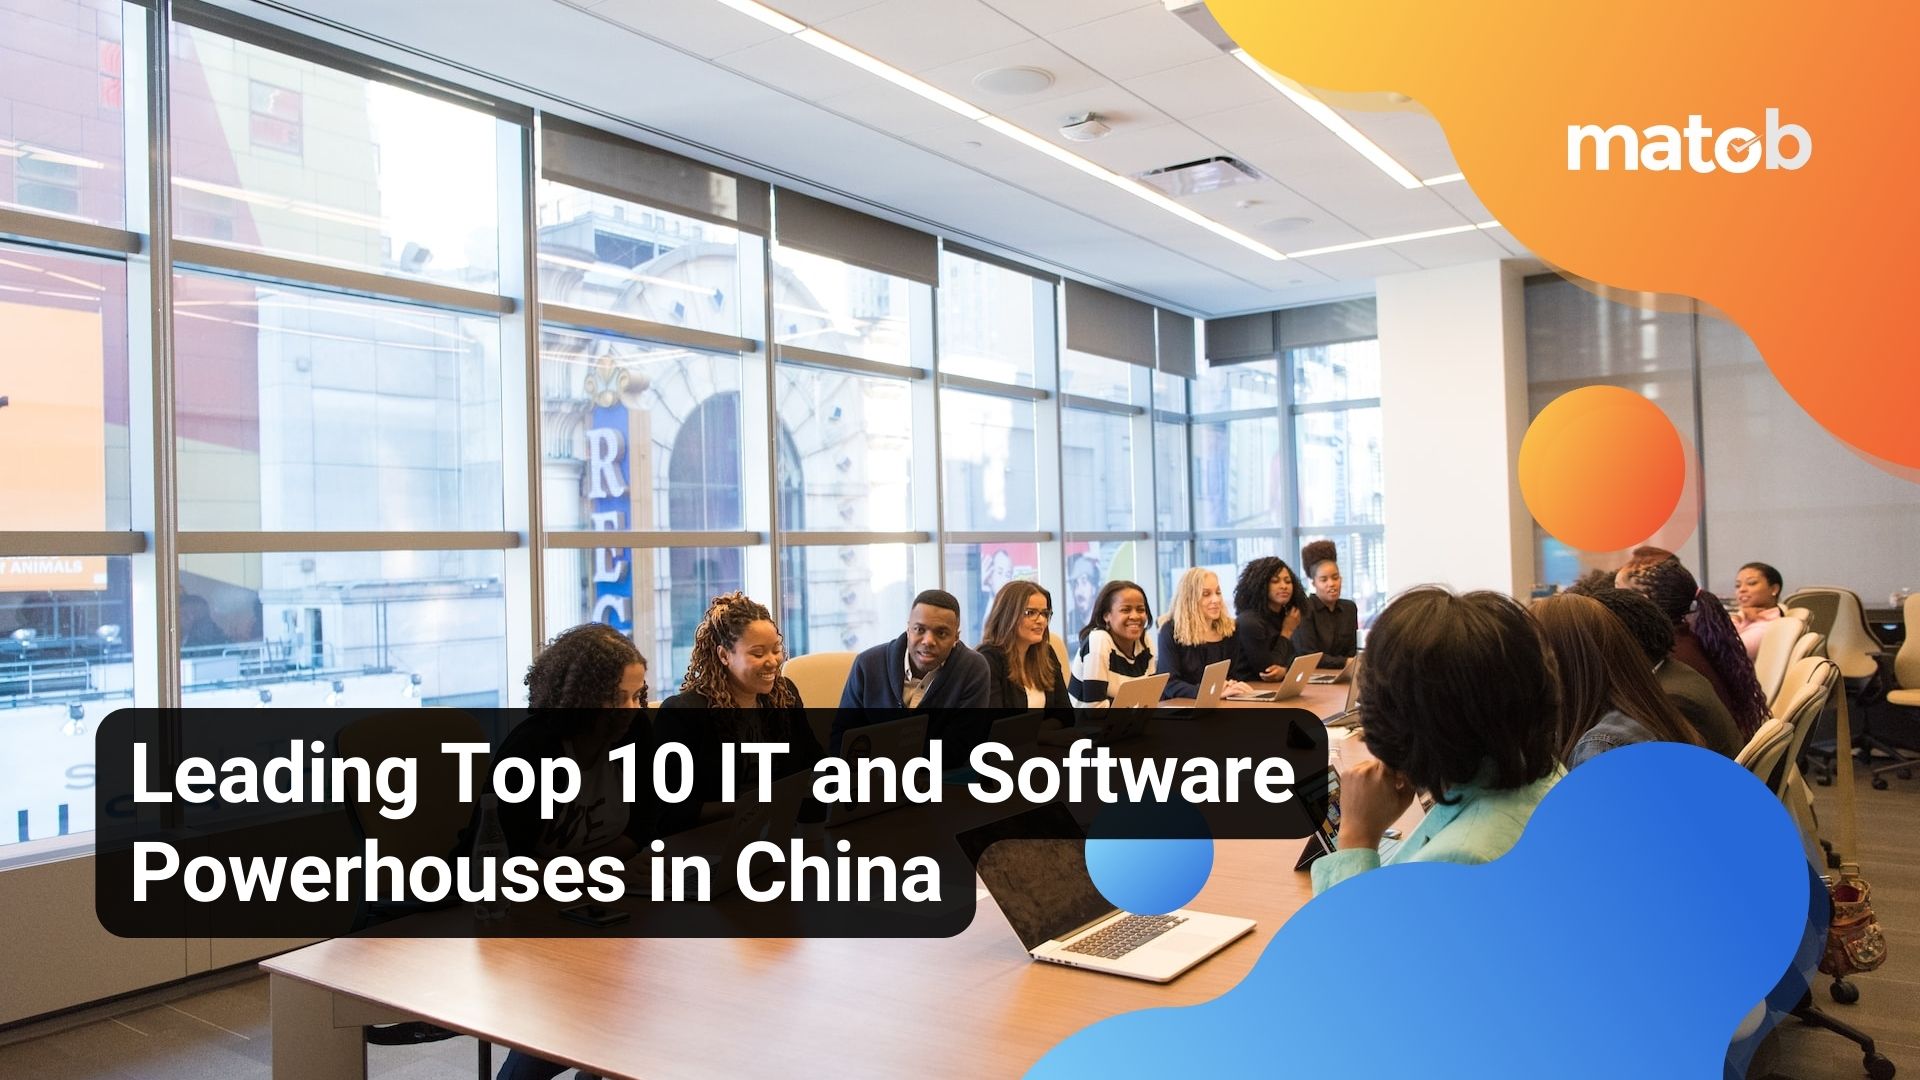 Leading Top 10 IT and Software Powerhouses in China